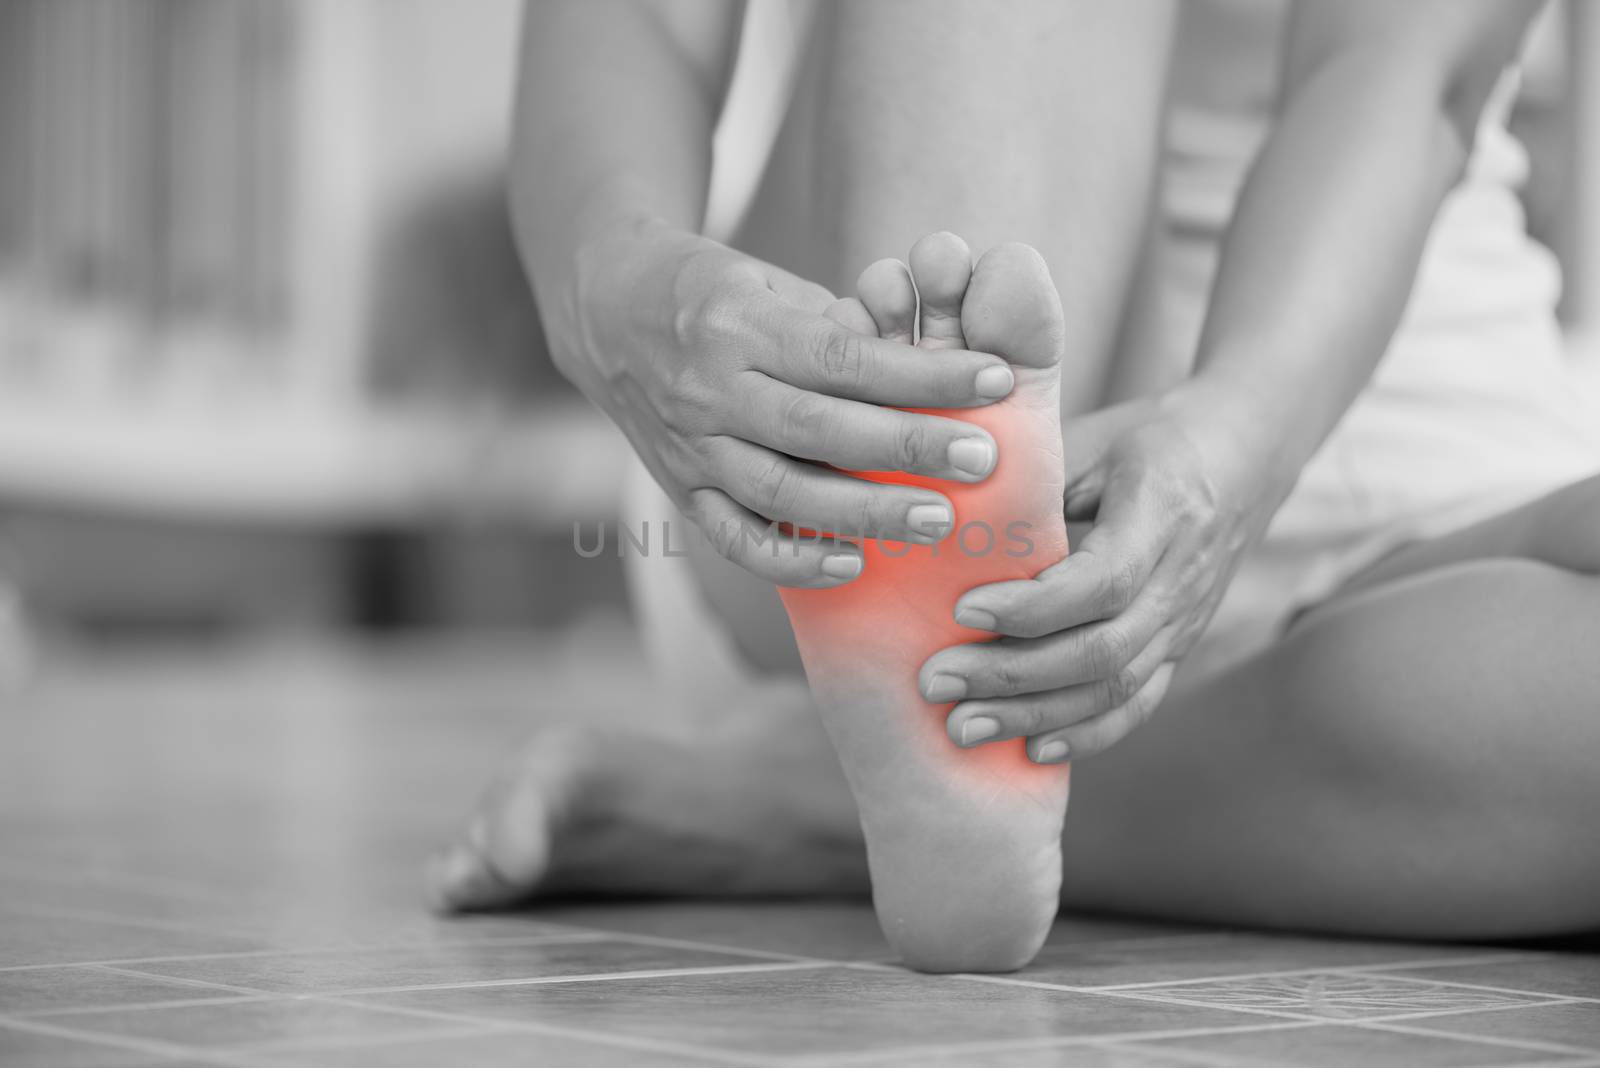 Closeup young woman feeling pain in her foot at home. Healthcare and medical concept.